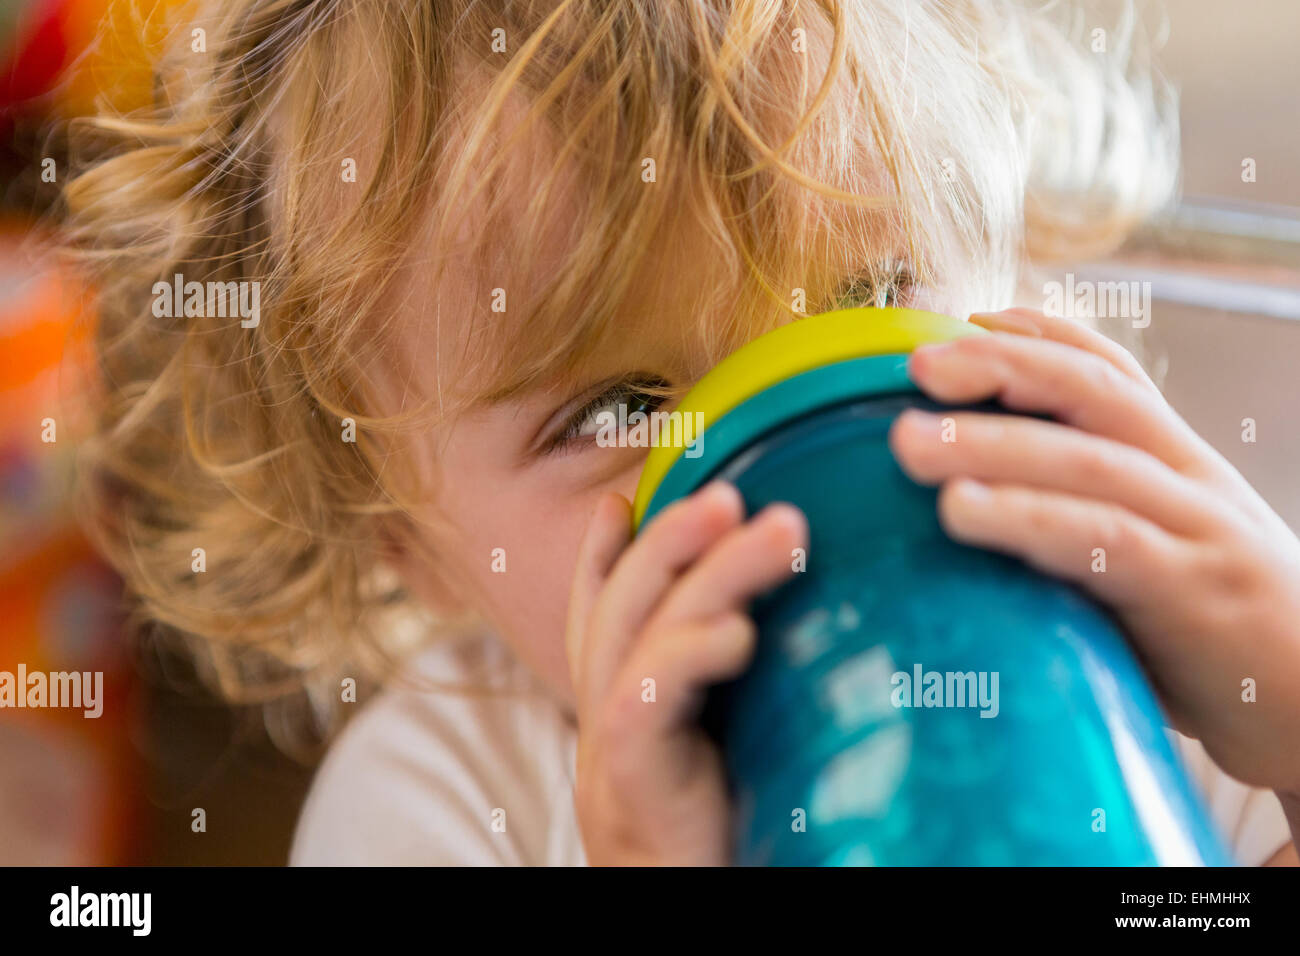 Caucasian baby drinking water from cup Stock Photo